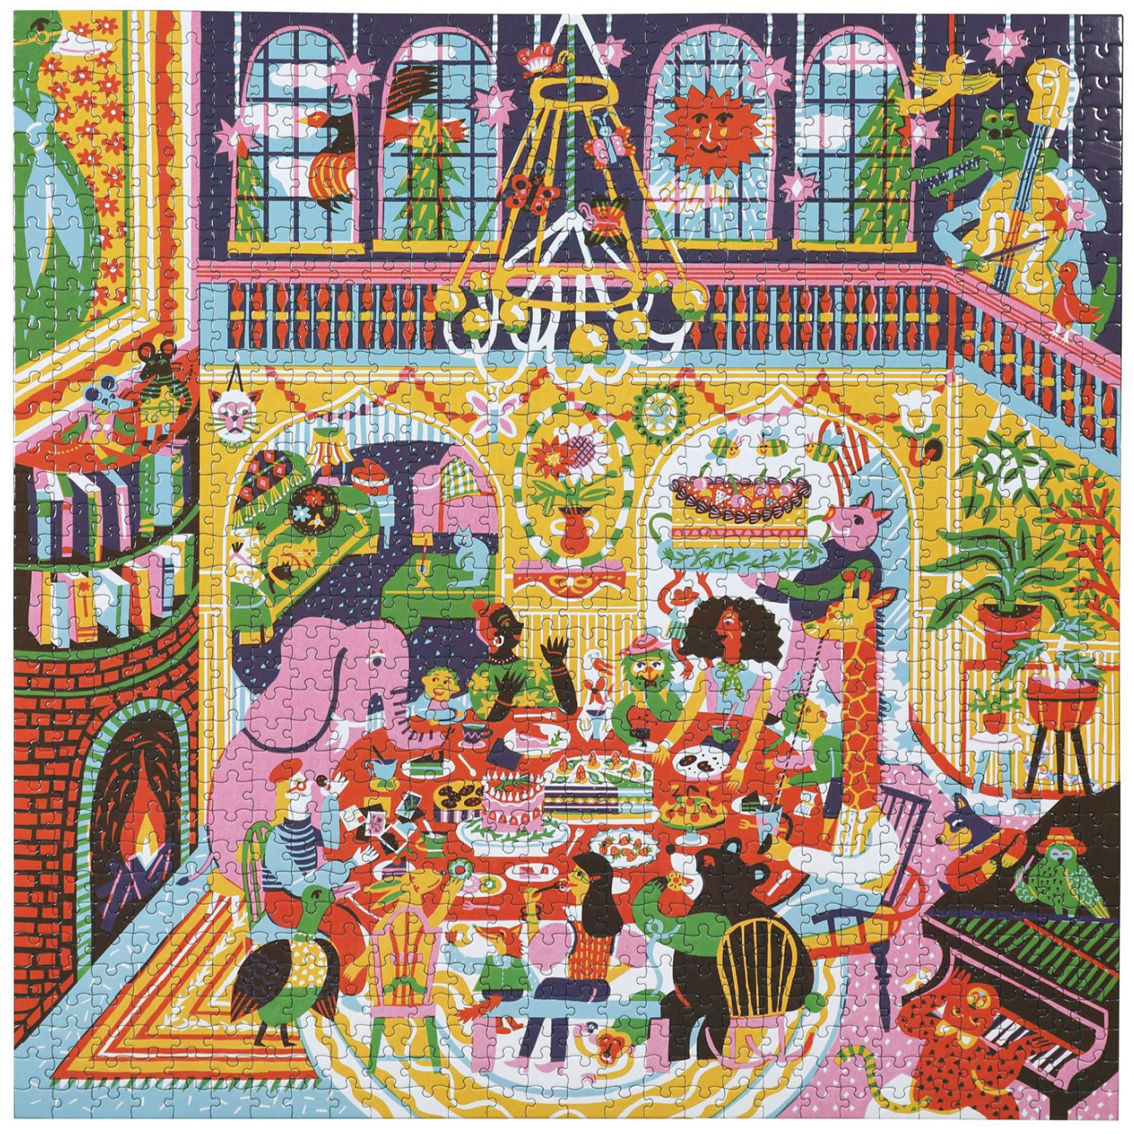 Family Dinner Night Square Jigsaw Puzzle 1000 pc. - Image 4 of 6